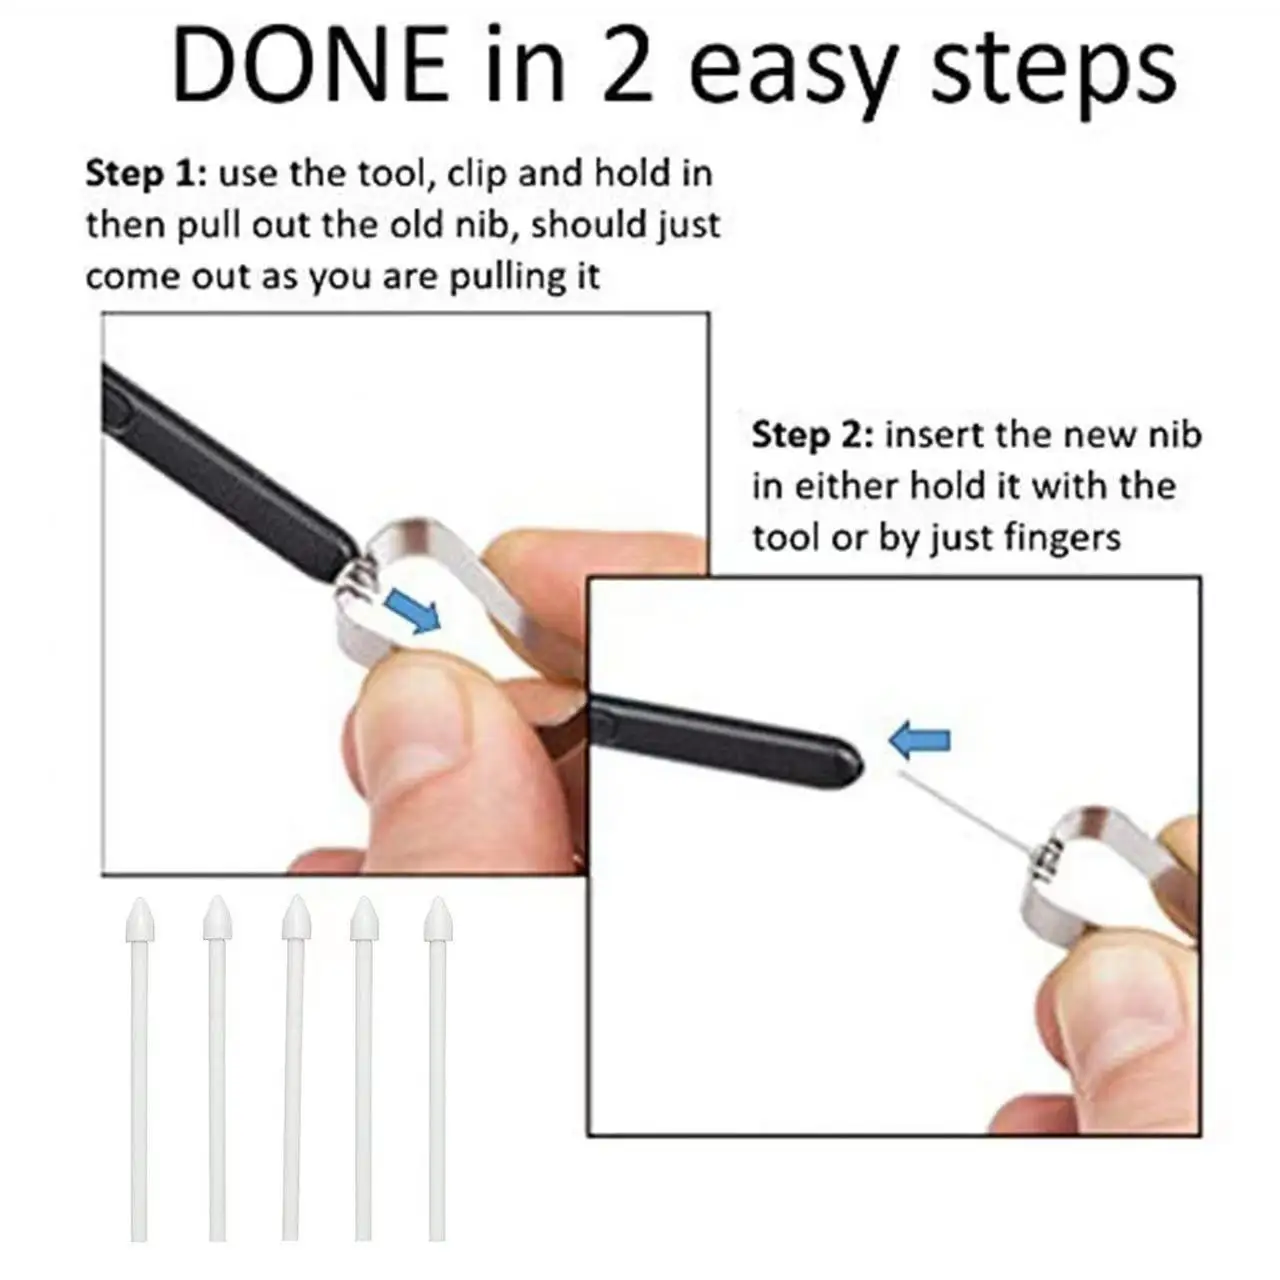 Remove Tool Touch Stylus S Pen Tips Apply For Samsung Galaxy Note 7 Note 8 Note 9 Tab S3 S4 Refill Tip images - 6